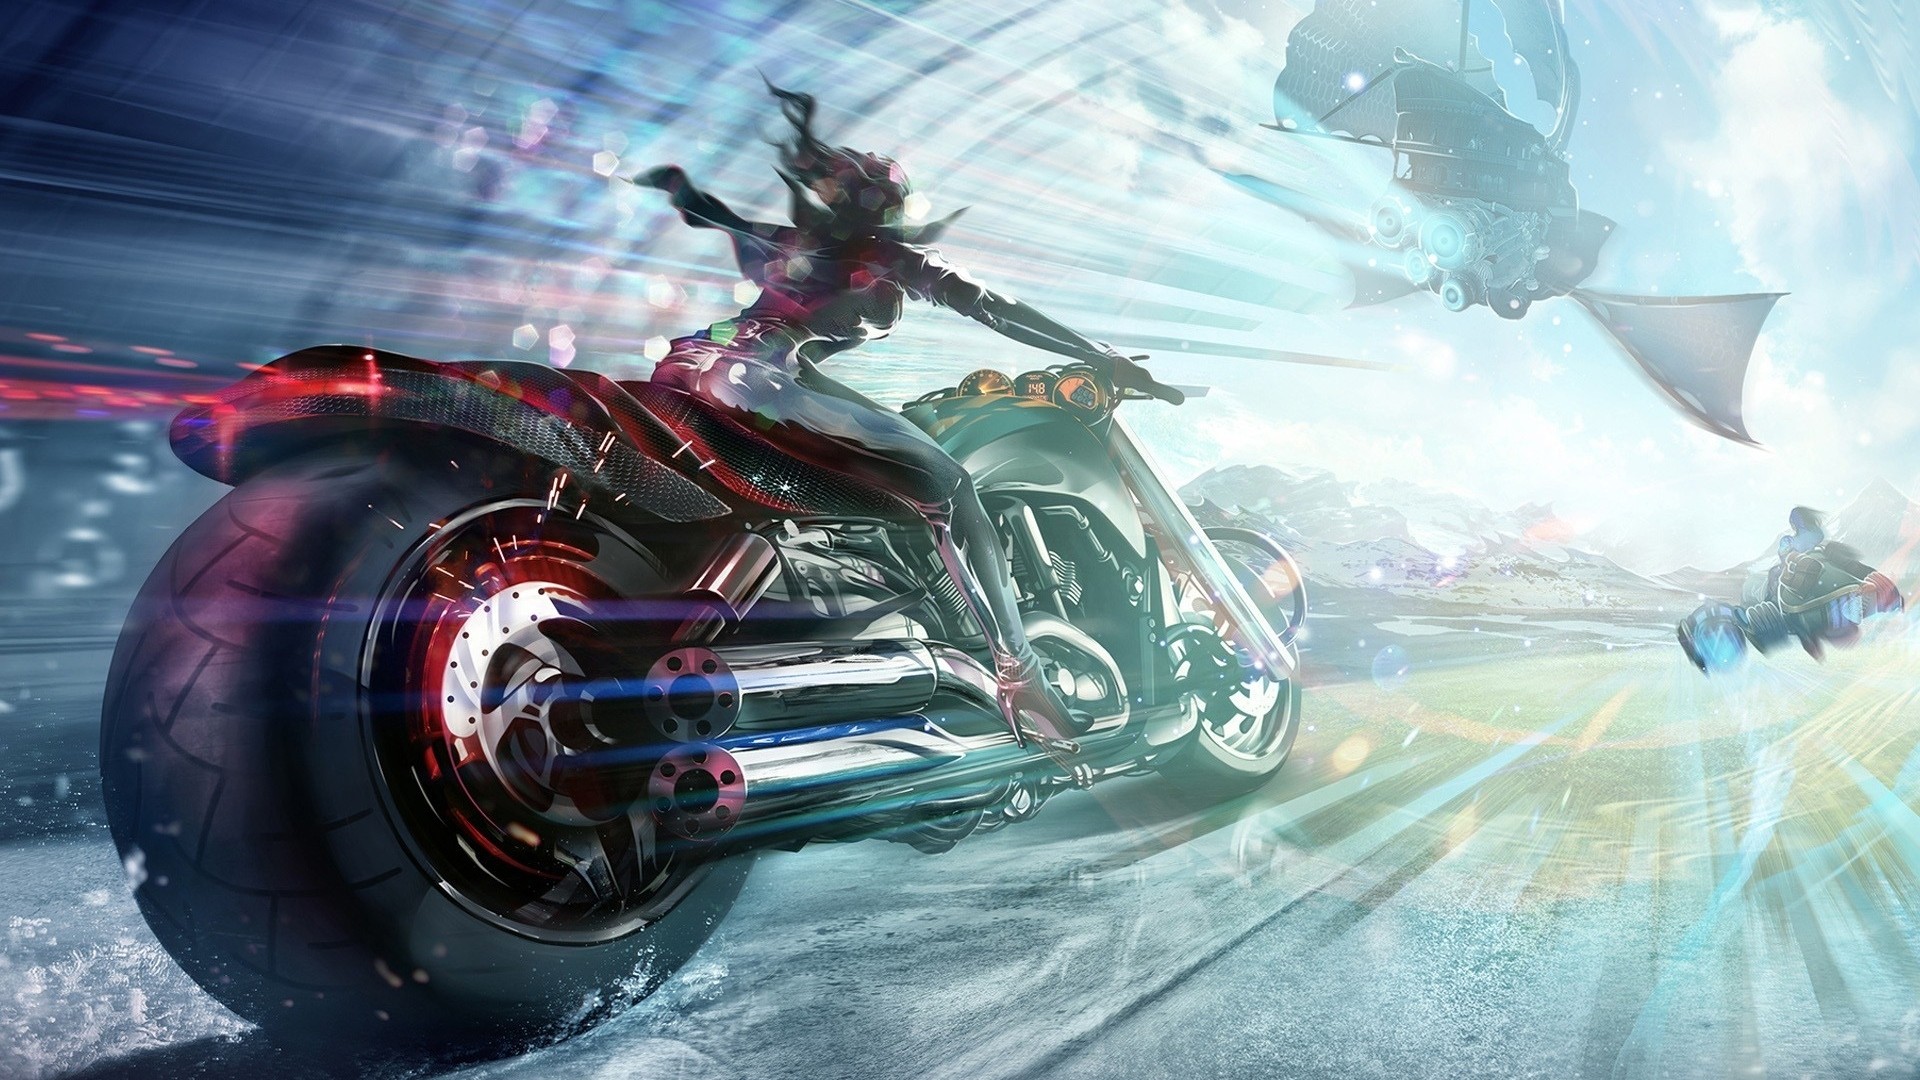 General 1920x1080 artwork concept art women motorcycle high heels airships digital art science fiction futuristic anime anime girls women with motorcycles vehicle